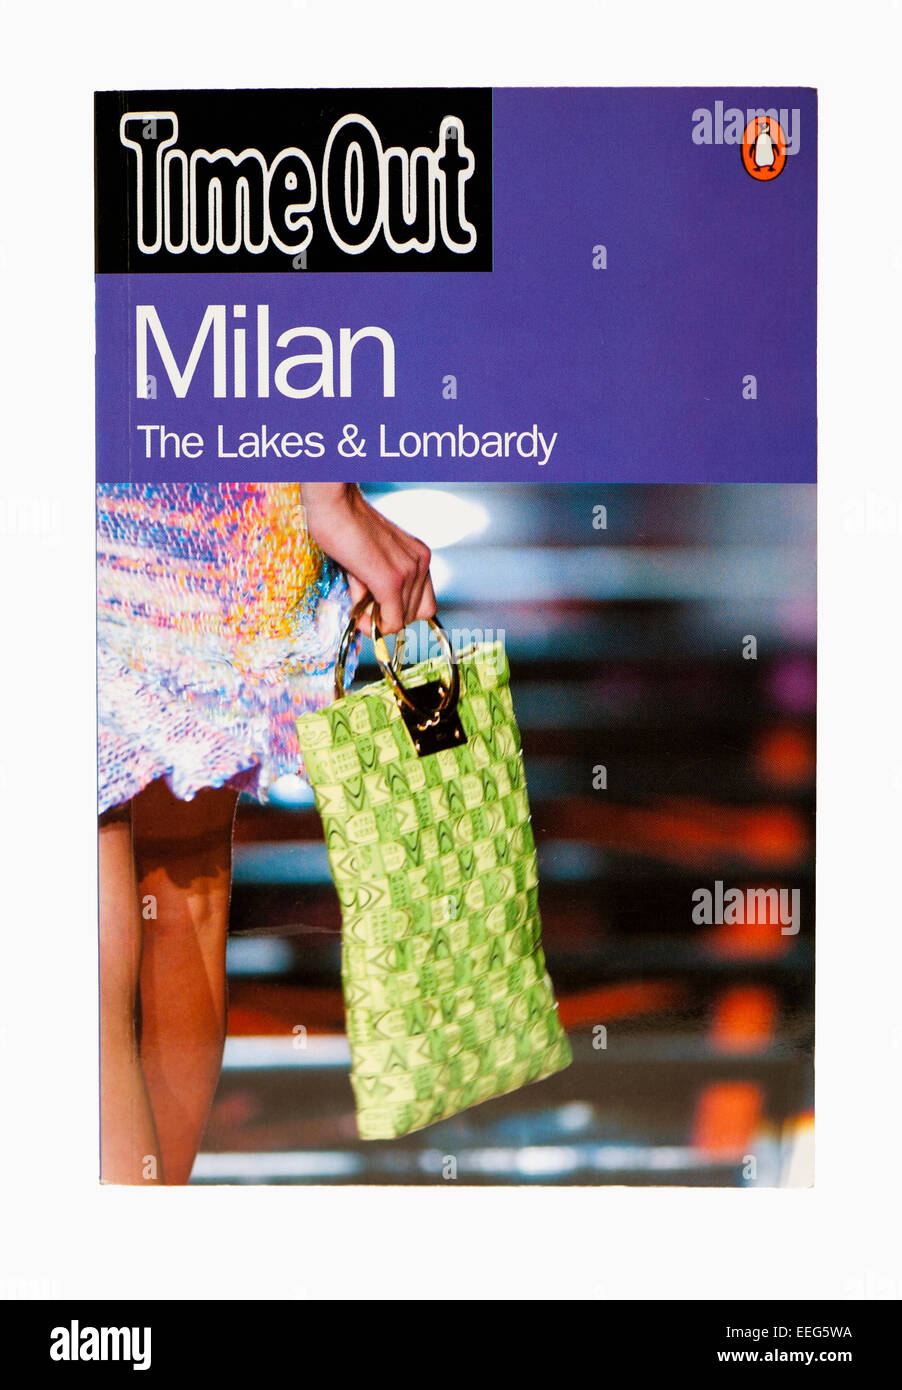 Milan Time Out Travel Guide Stock Photo